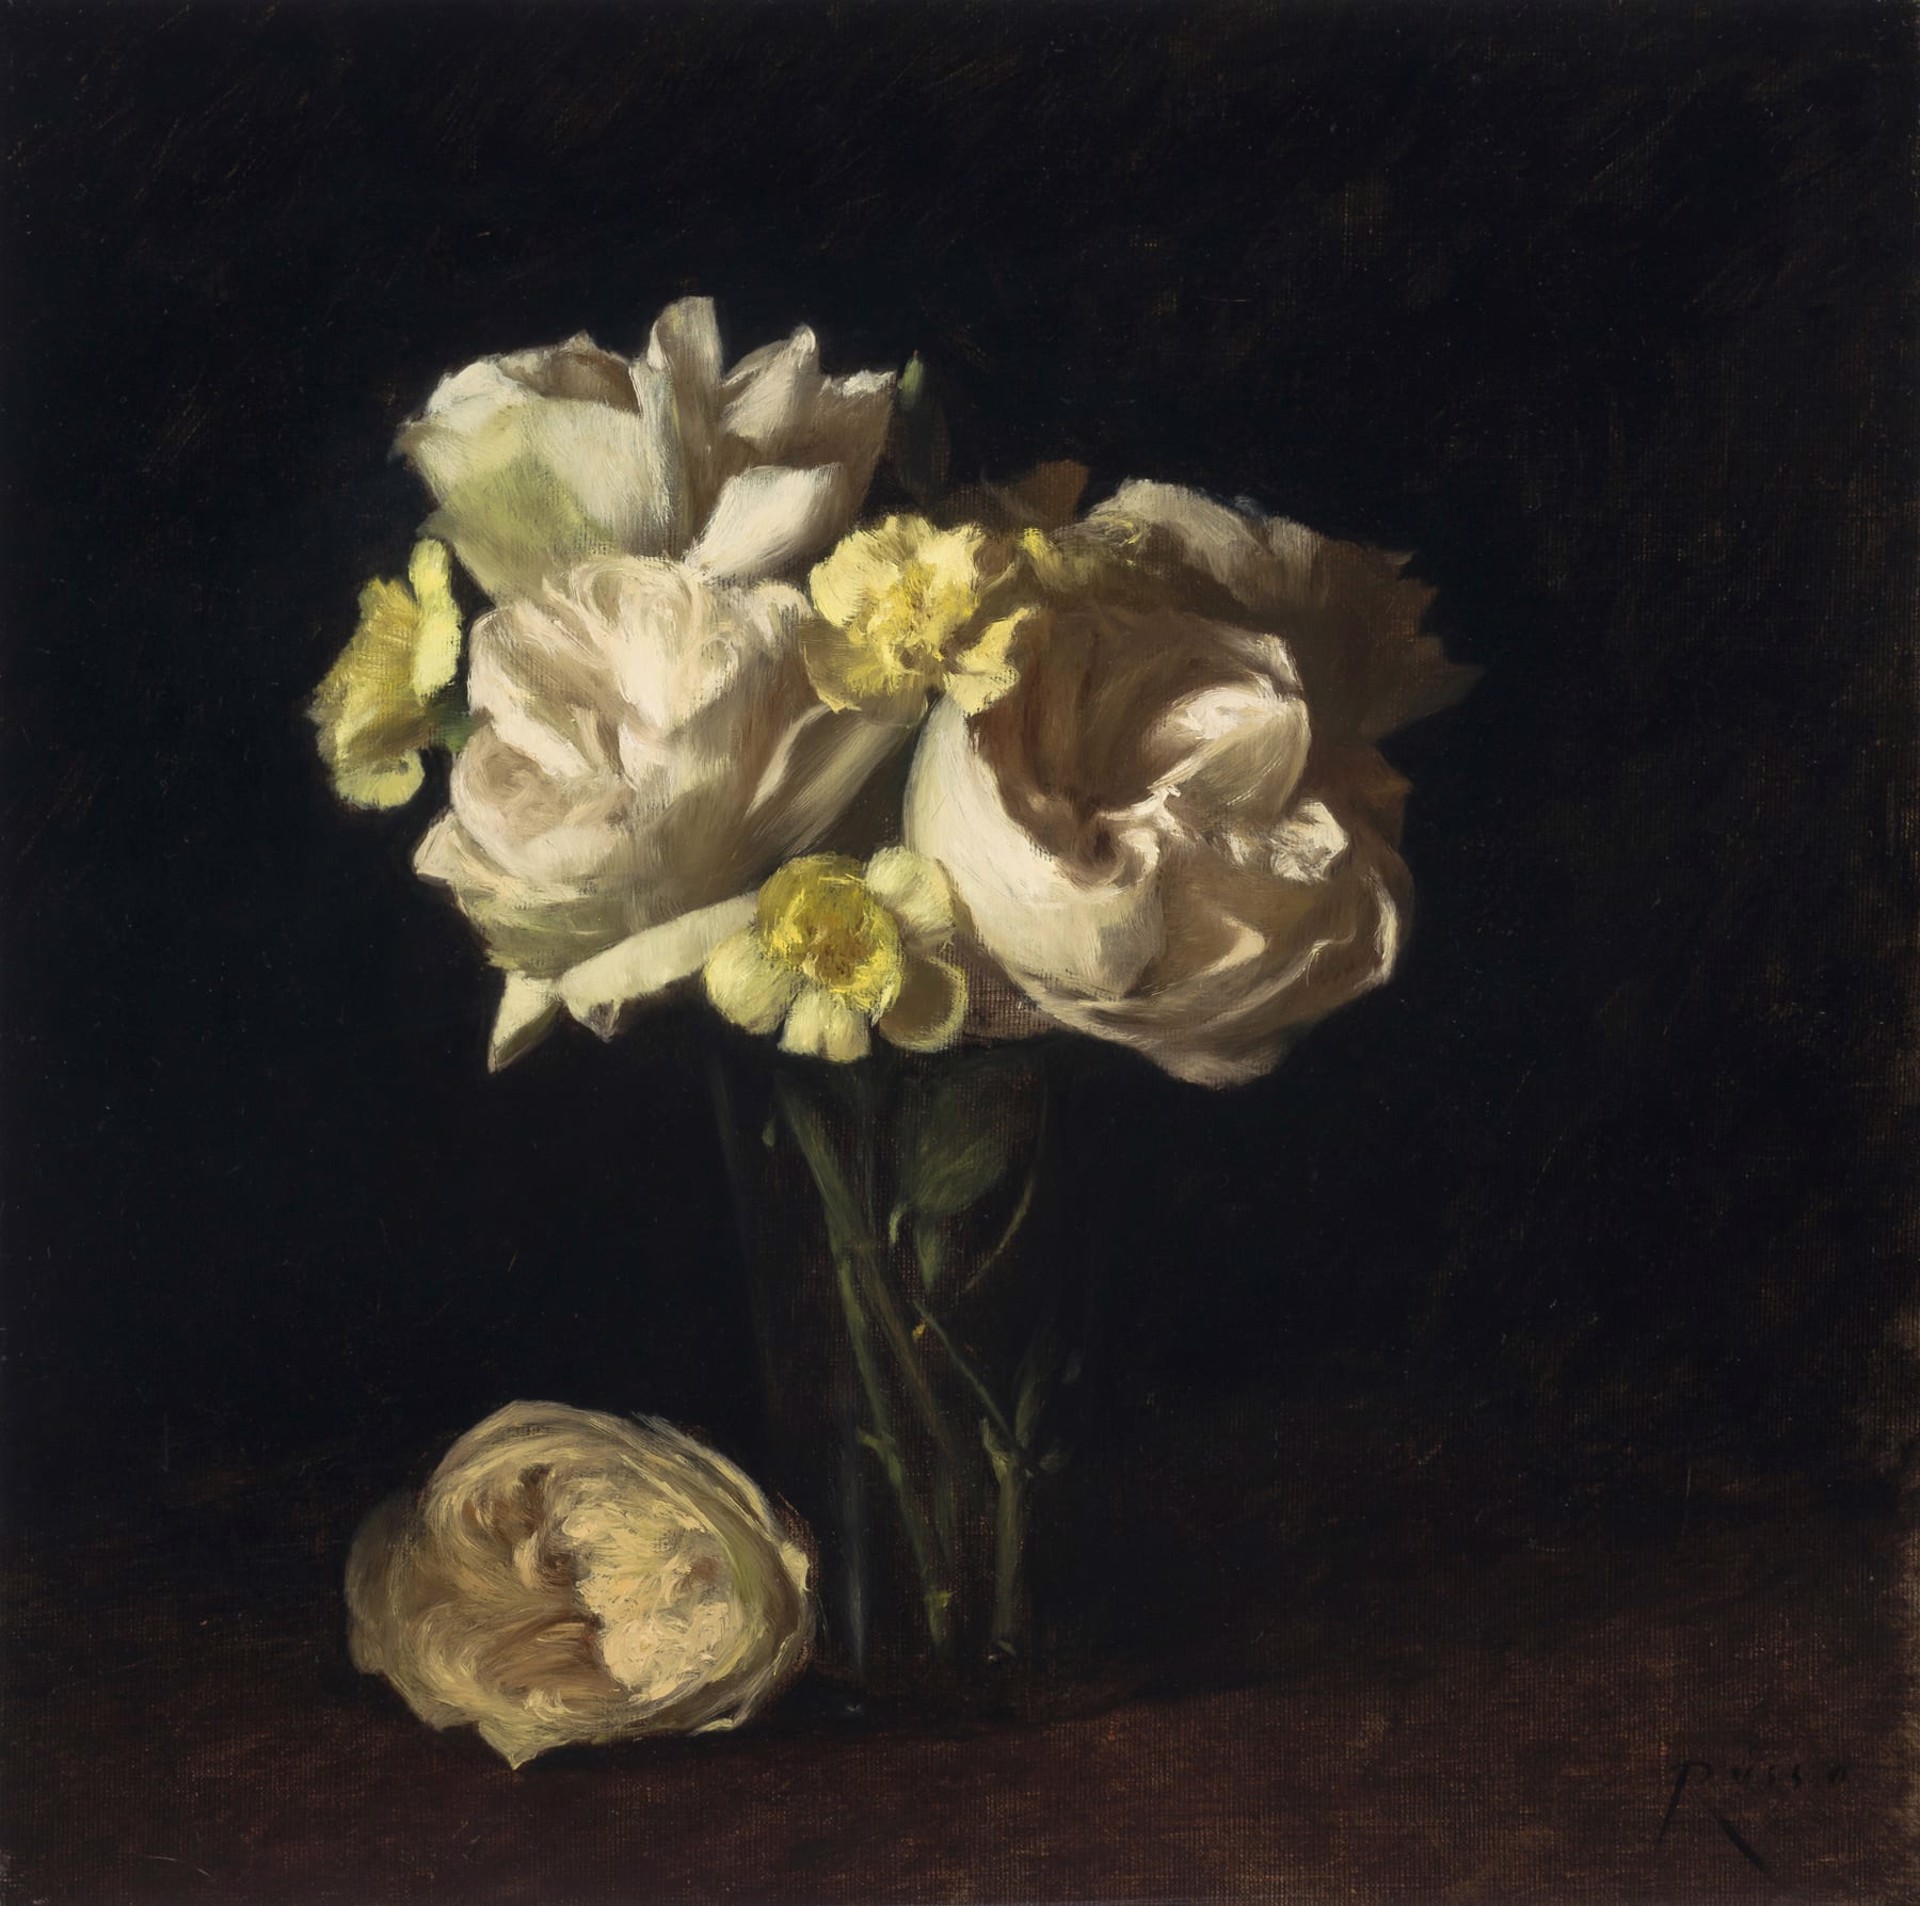 White Roses and Yellow Carnations by Carlo Russo